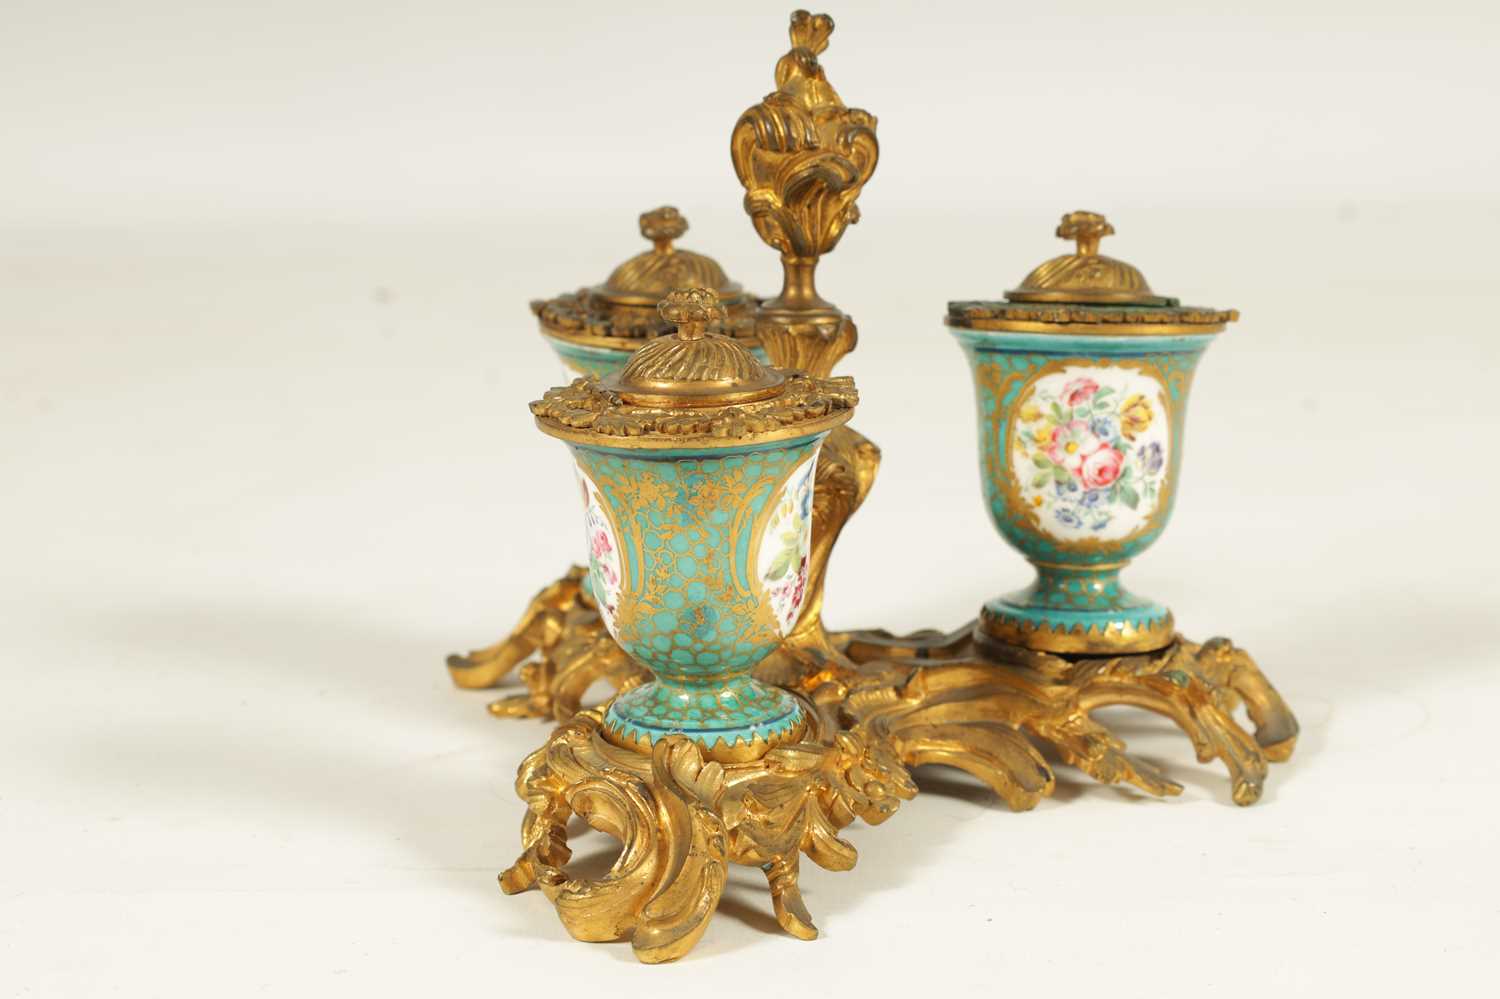 A 18TH CENTURY FRENCH ROCOCO ORMOLU AND SERVES STYLE TRIPLE INKSTAND - Image 7 of 10